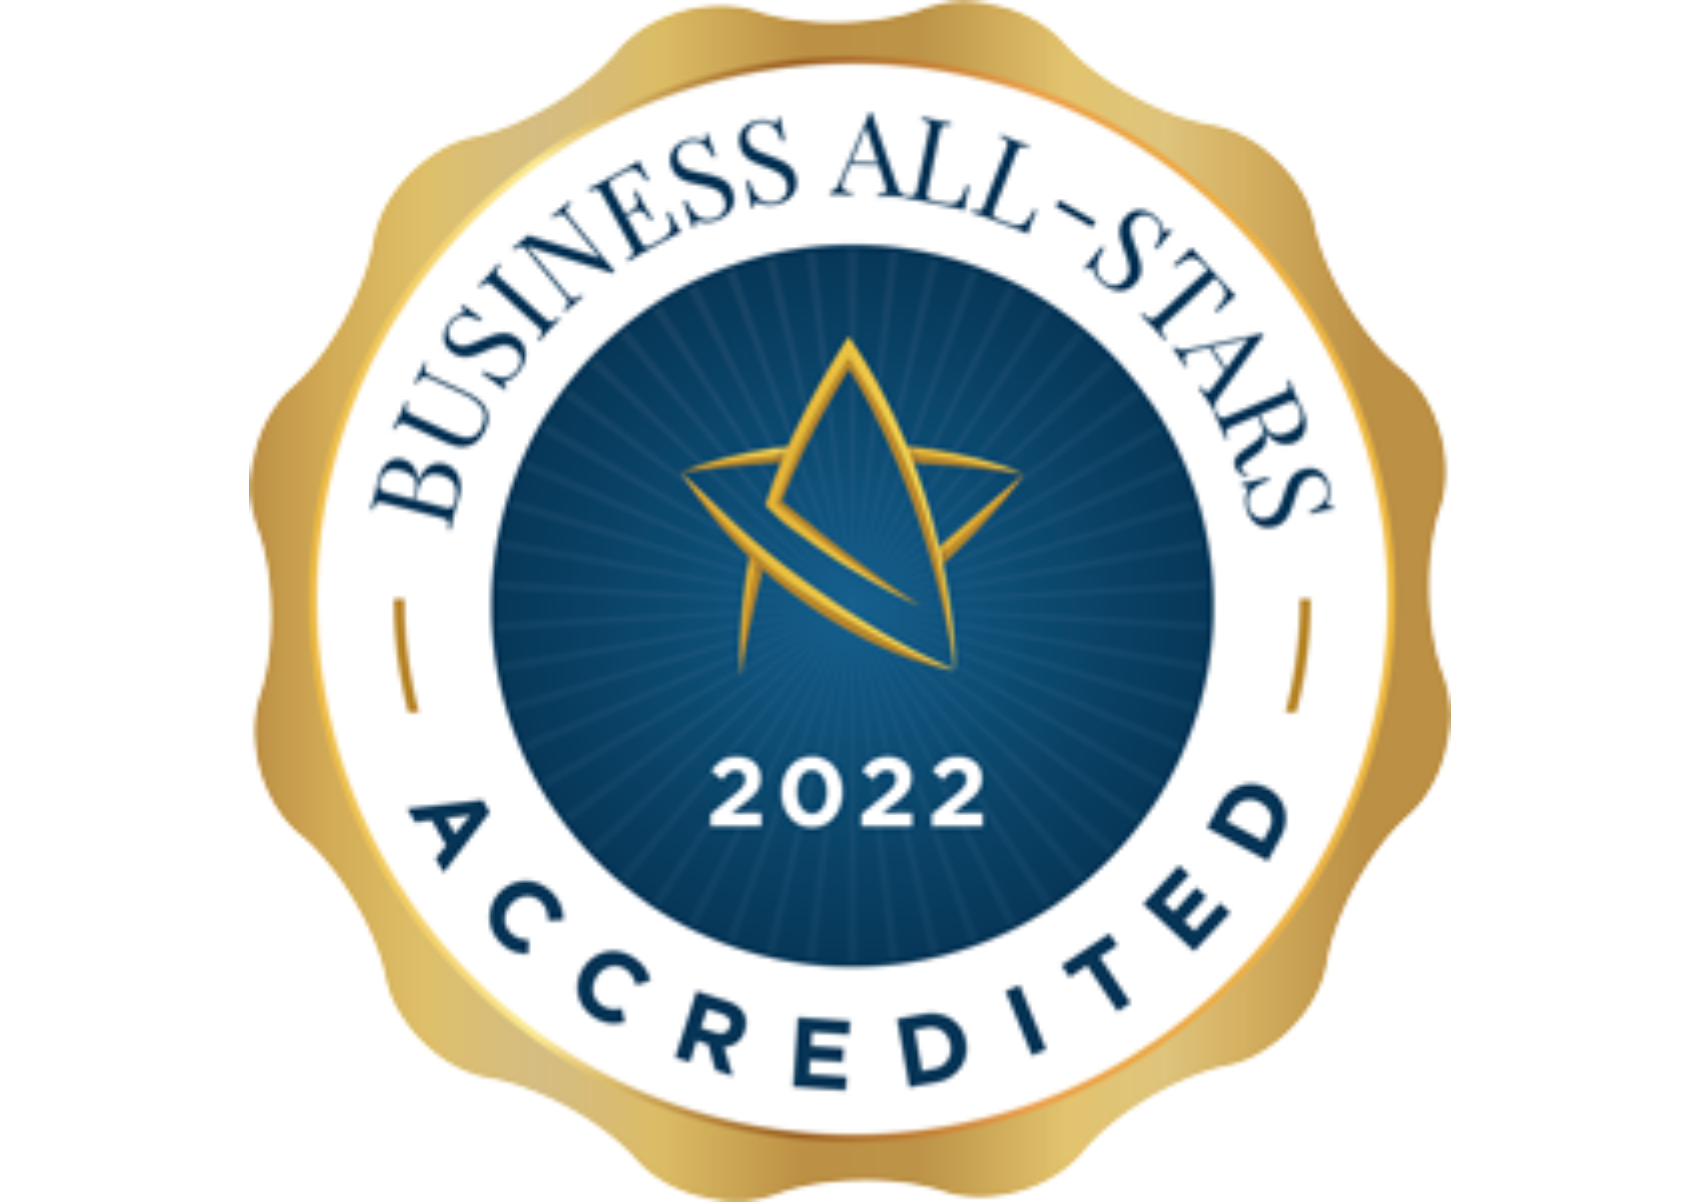 Business all-stars - Accredited